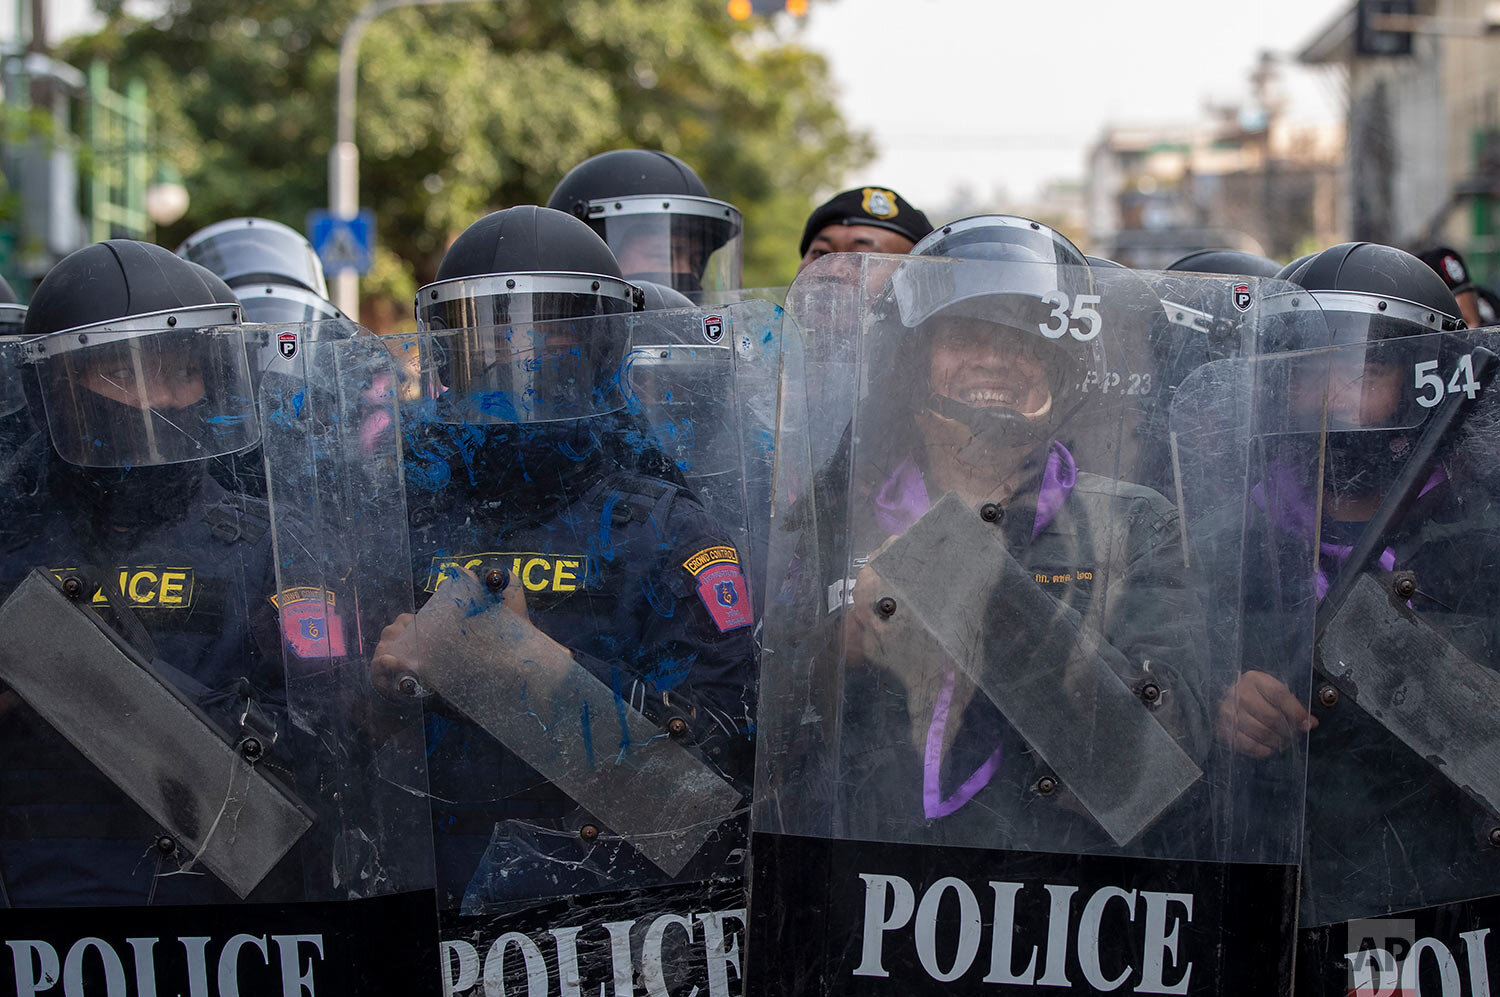  Police in riot gear stand guard as they face pro-democracy protesters during a rally Thursday, Dec. 10, 2020 in Bangkok, Thailand.  (AP Photo/Gemunu Amarasinghe) 